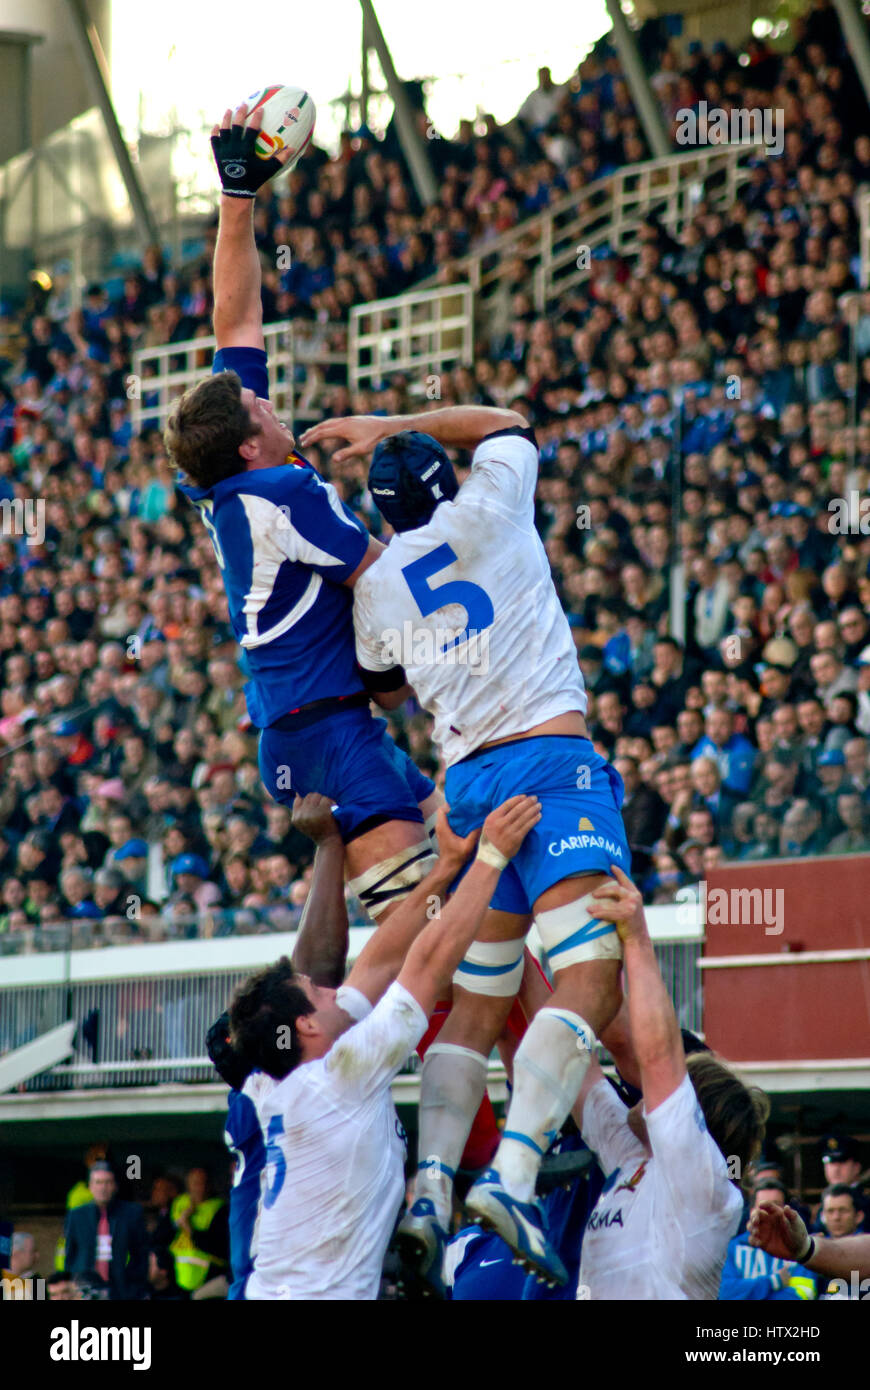 ROM, ITALIEN - 3. FEBRUAR 2007. Rugby Six Nations cup Italien-Frankreich. Spieler springen in Line-out-Aktion Stockfoto